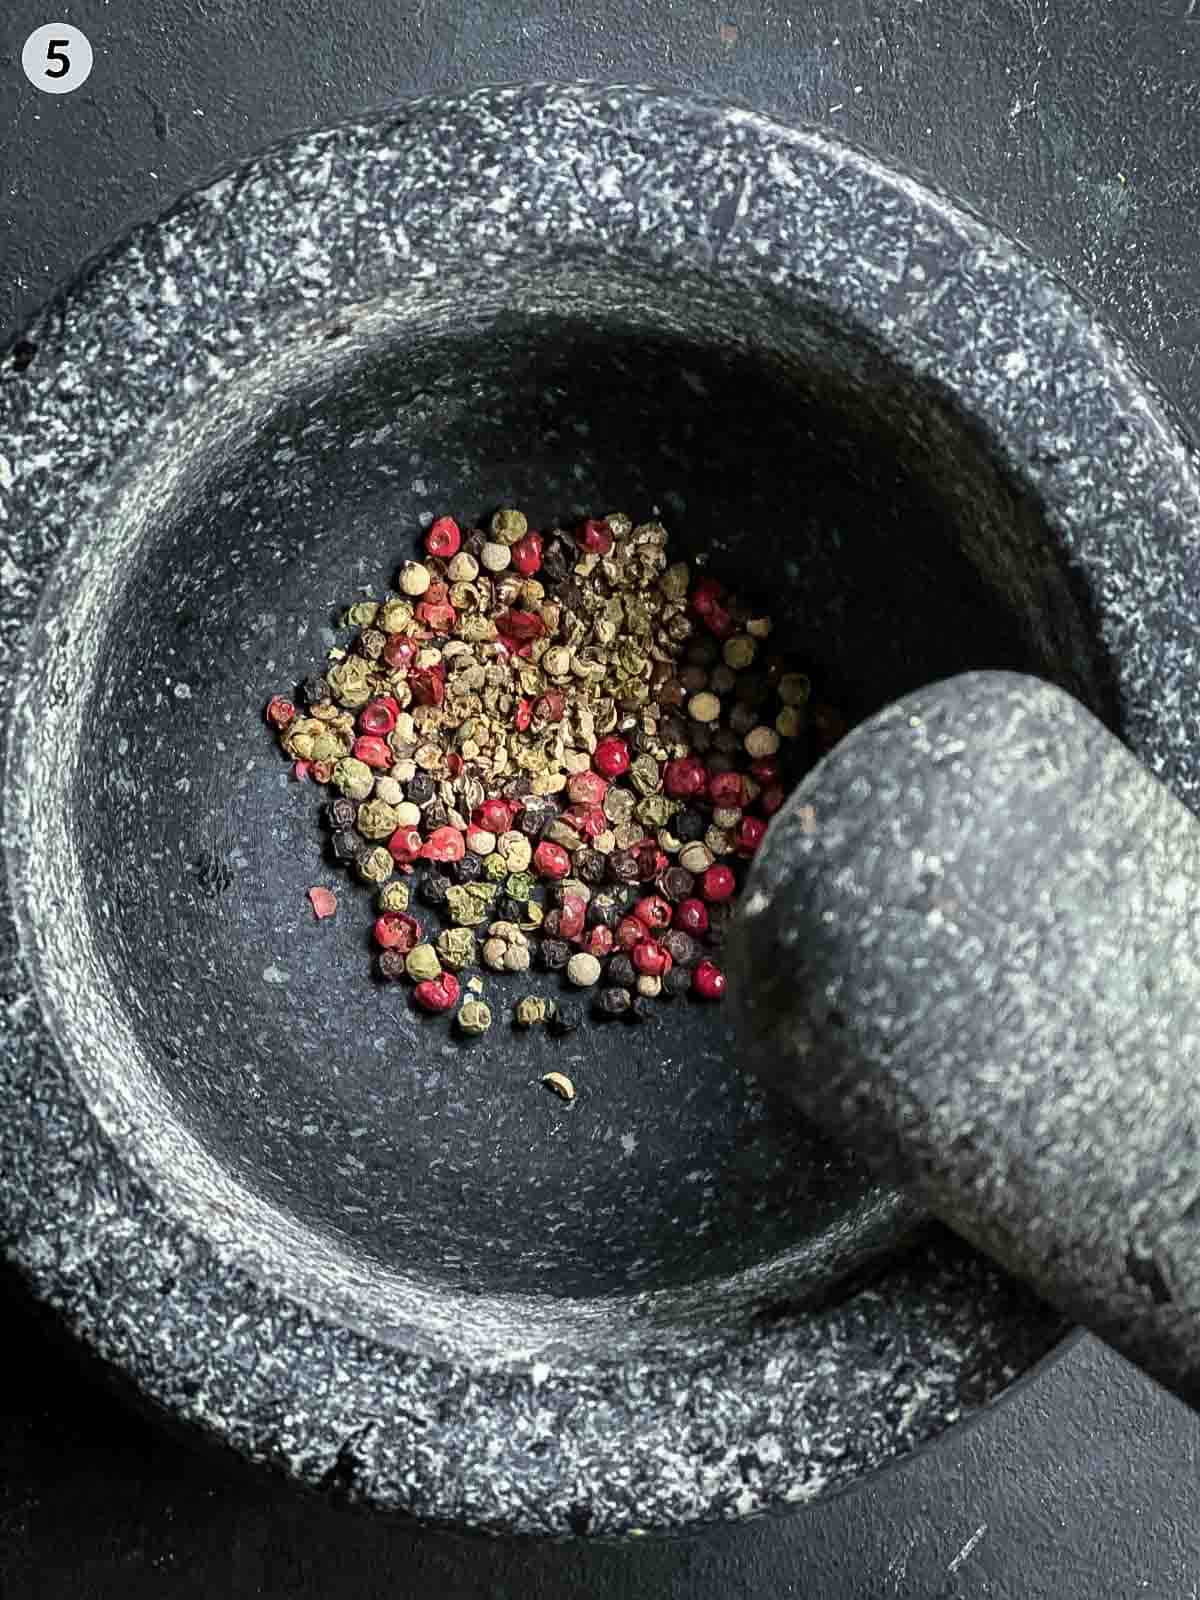 Rainbow peppercorns in a mortar and pestle